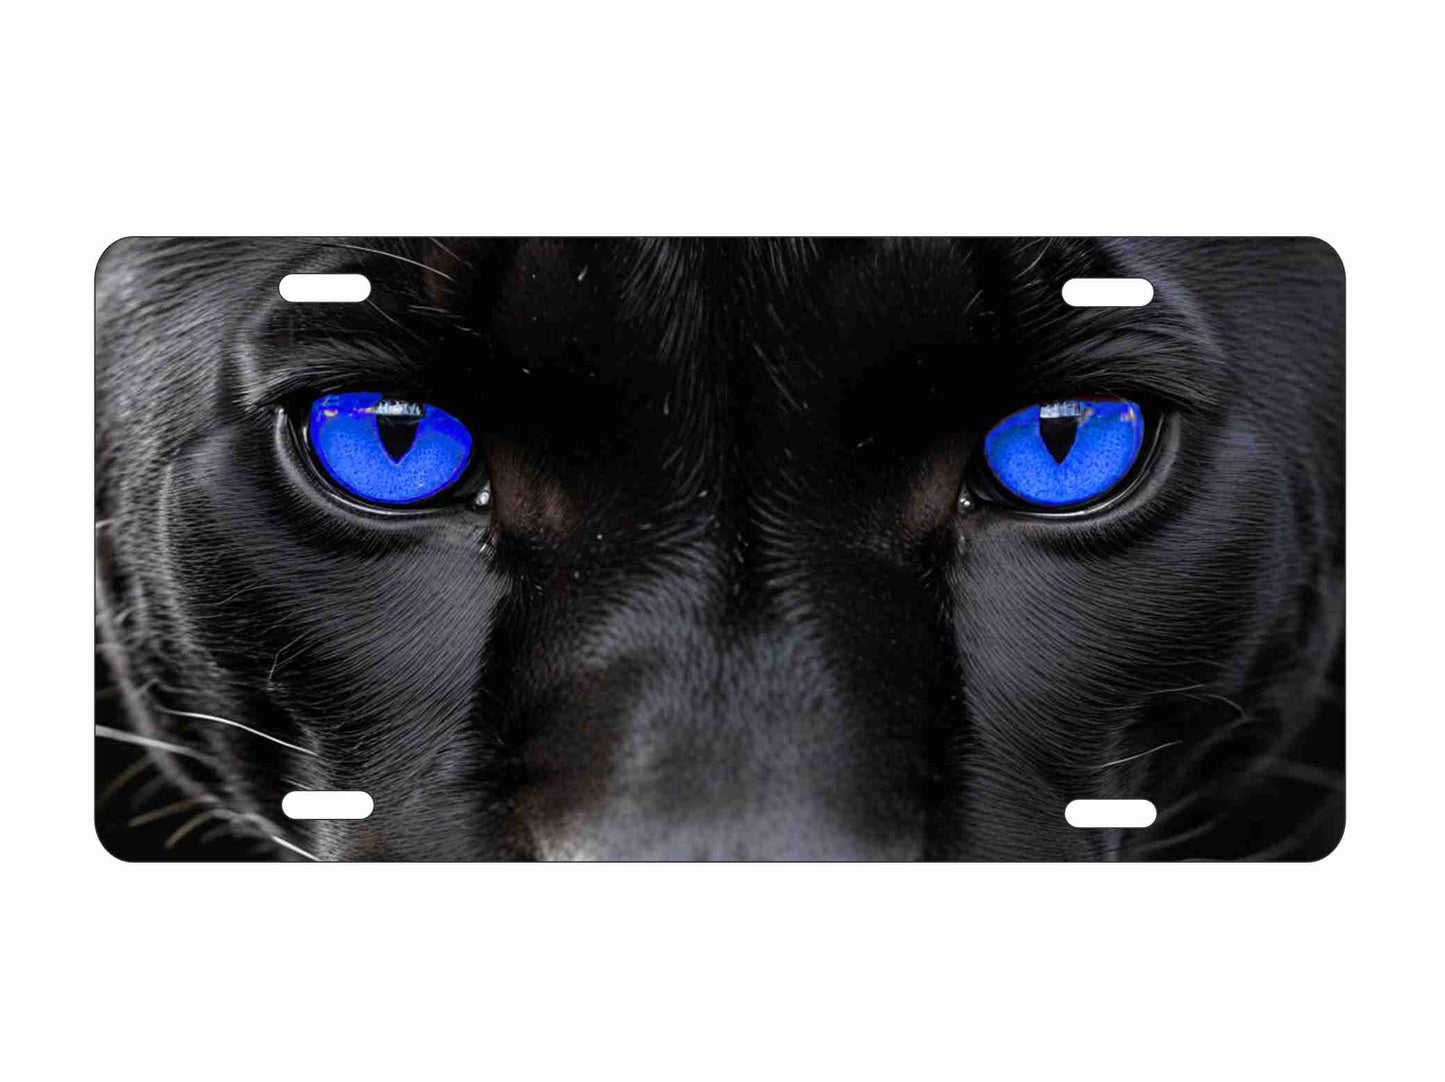 Panther face blue eyes personalized novelty front license plate Decorative custom vanity car tag